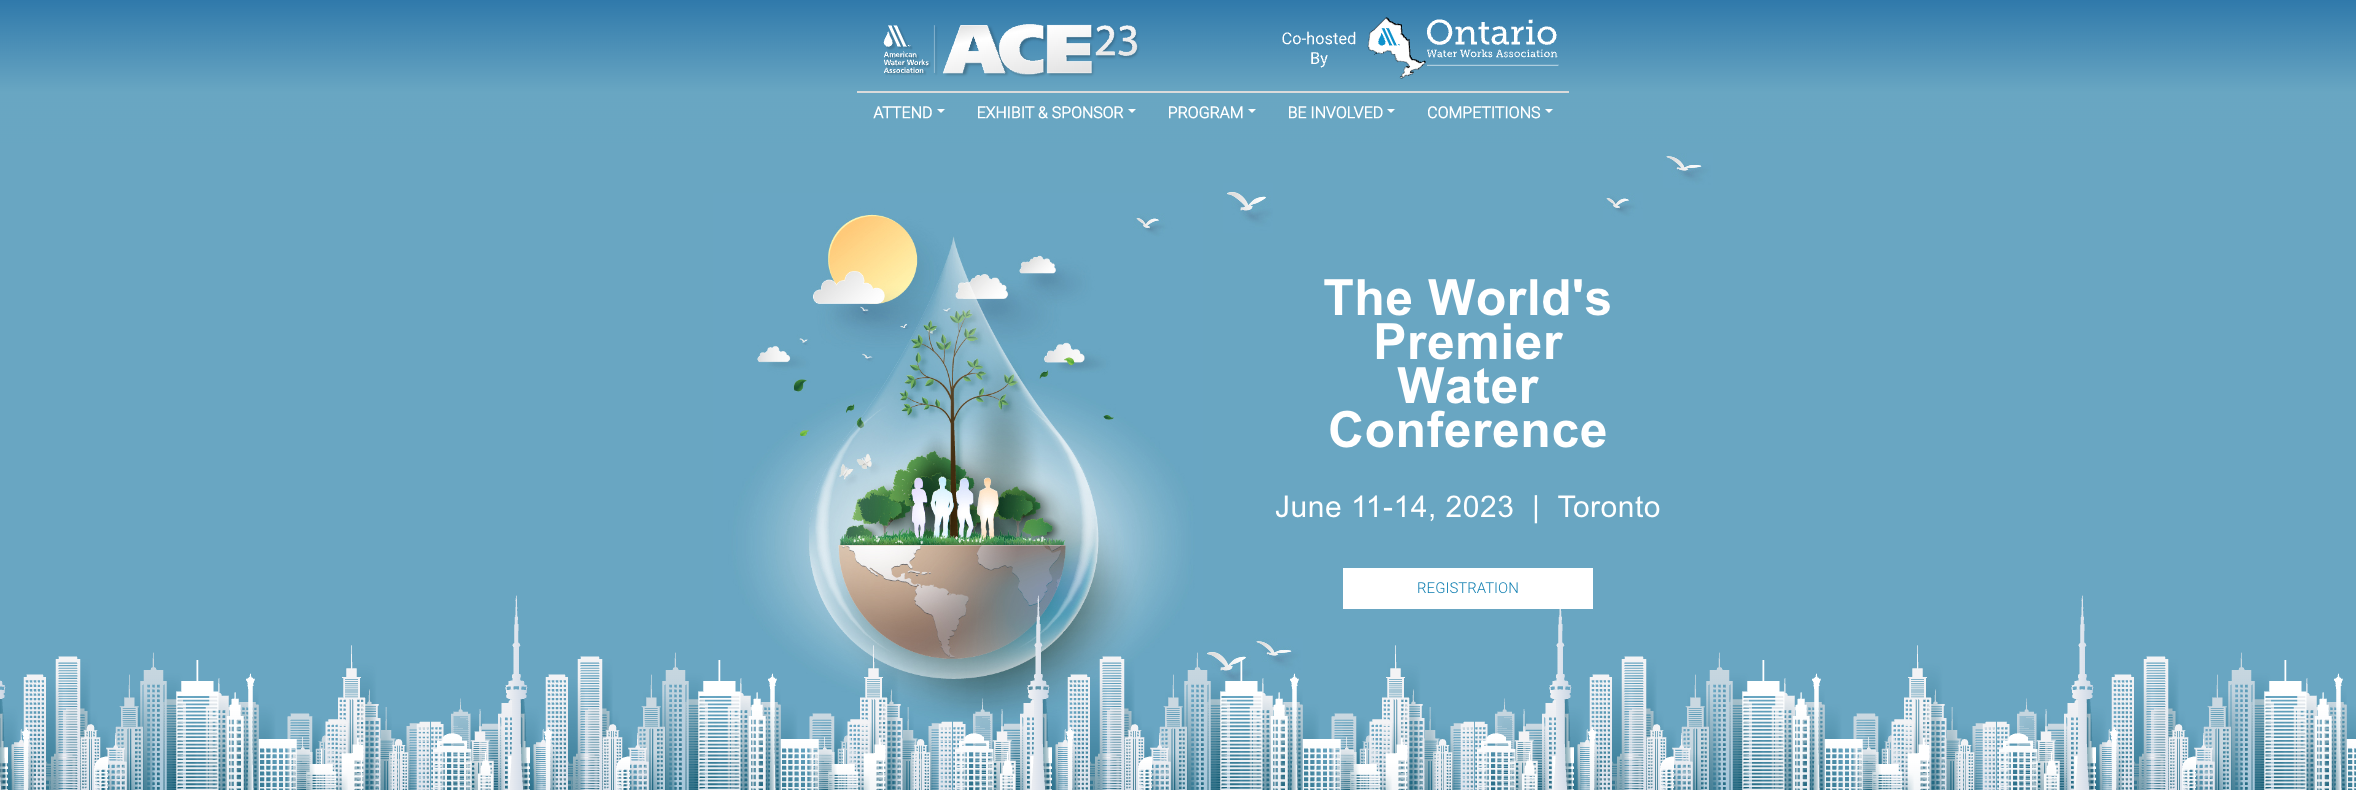 Ace23 AWWA Annual Conference